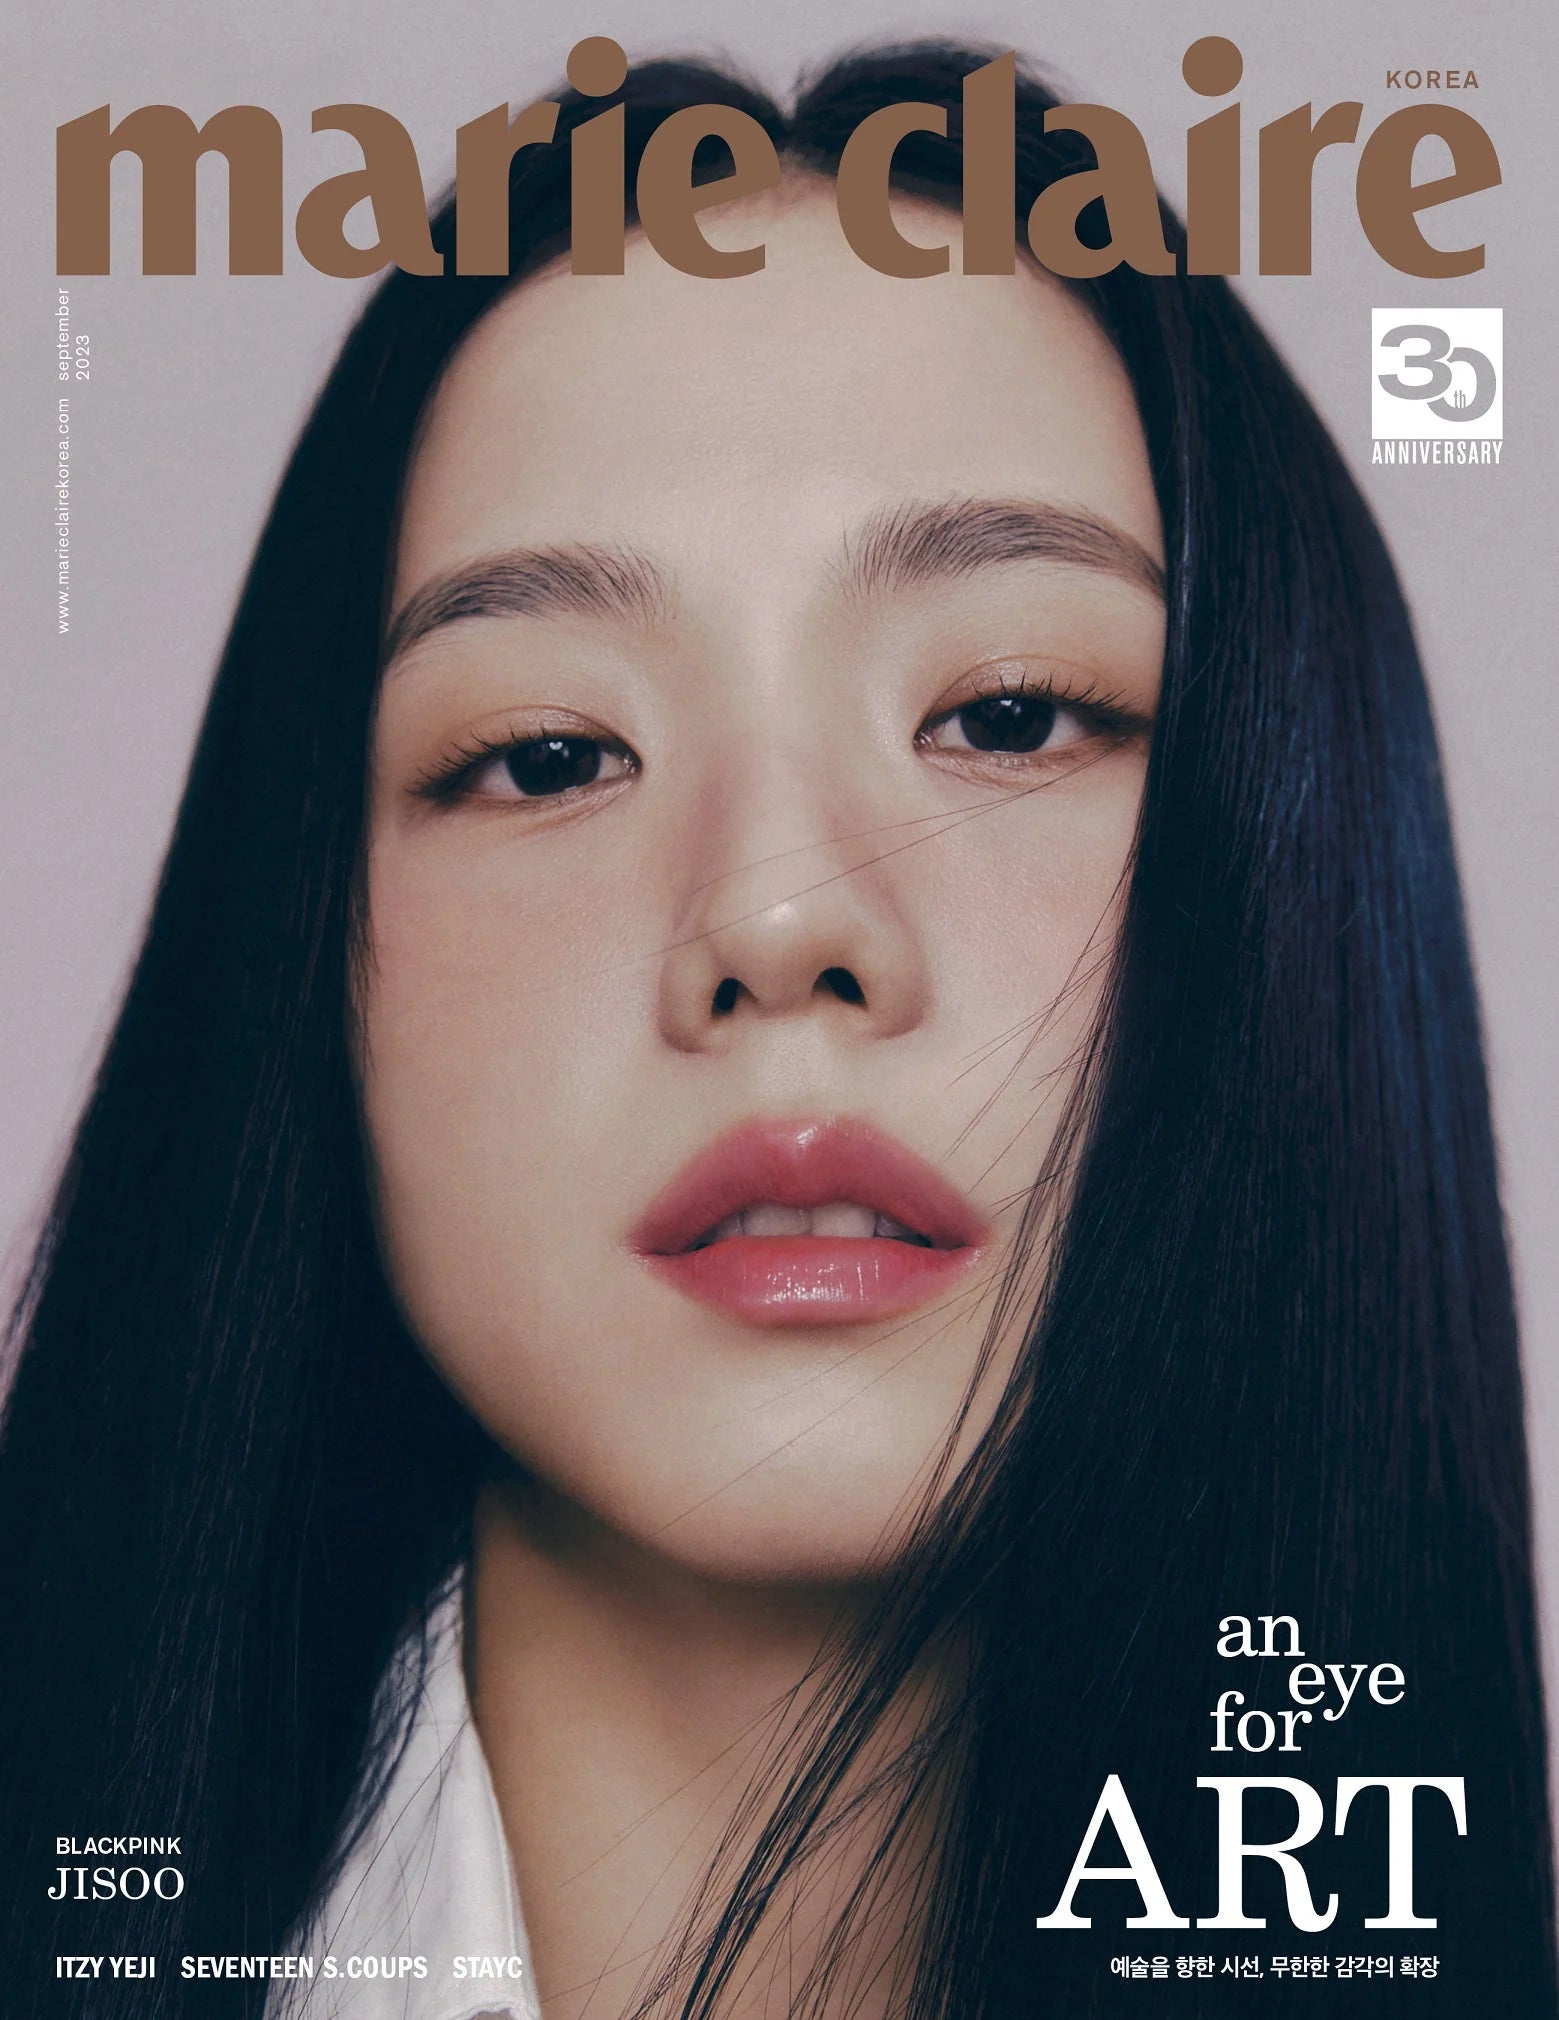 JYP NEWS on X: 📸 230904 .@ITZYofficial's YEJI photo shoot and interview  for the September issue of Marie Claire Korea has unveiled. 🔥 (2/2) #ITZY  #있지 #YEJI #예지  / X